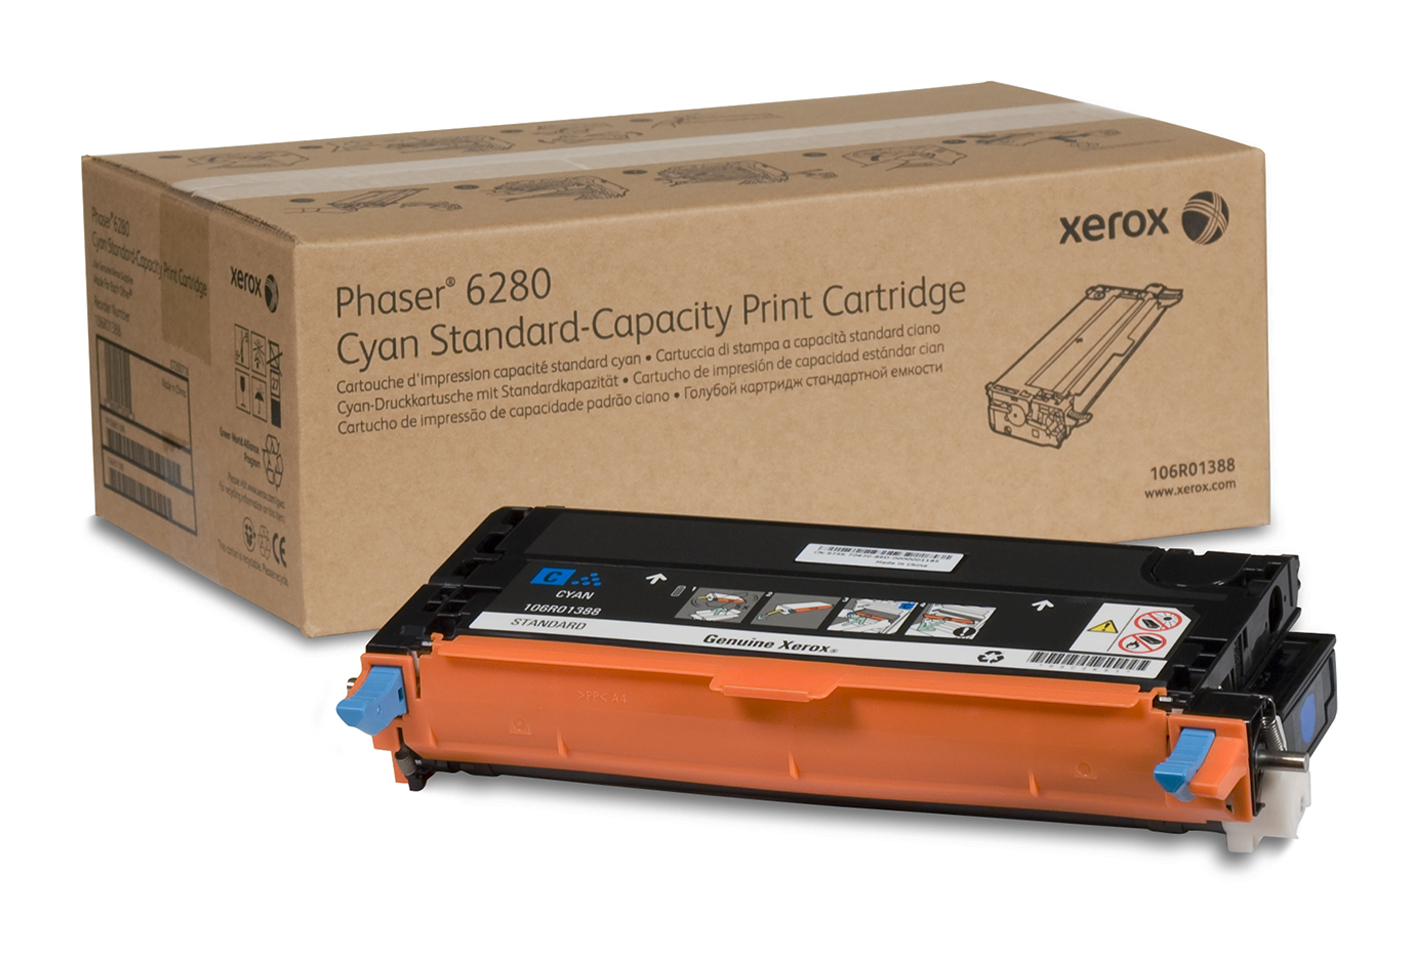 Xerox 106R01388 Toner cyan, 2.2K pages for Xerox Phaser 6280